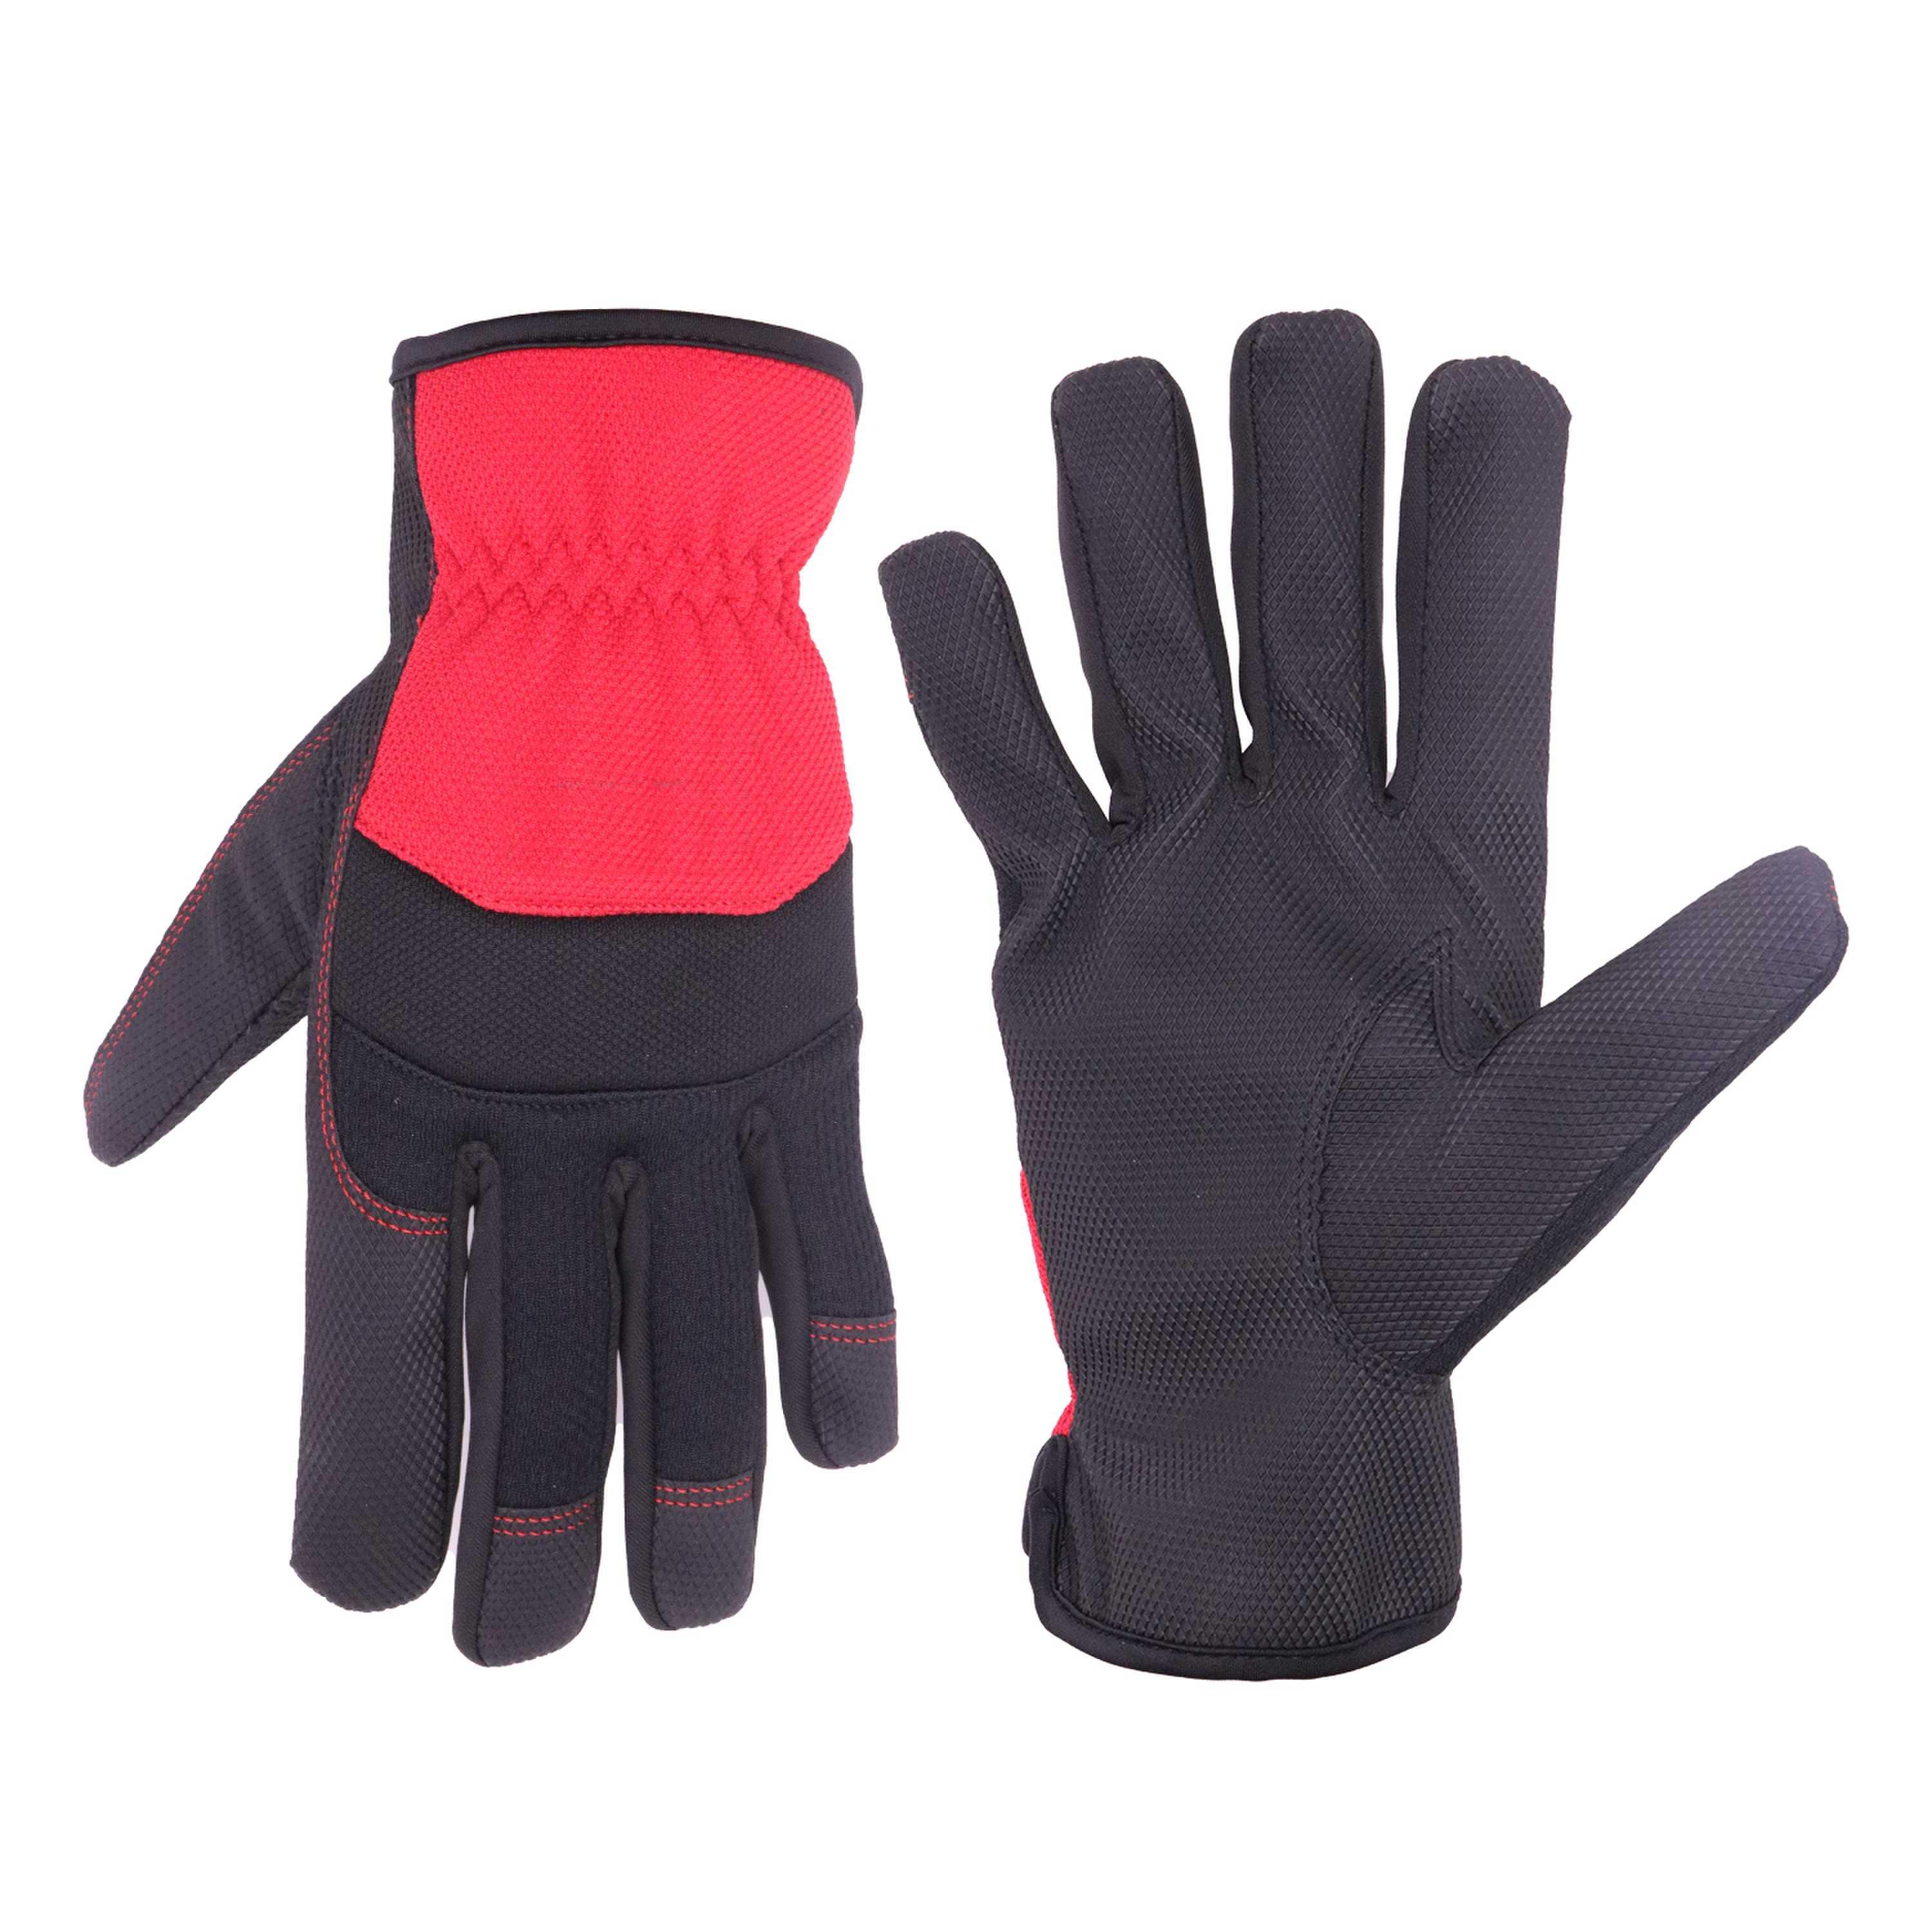 6126 PRISAFETY PU Fabric Palm Non Slip Bike Hand riding racing Cycling motorcycle Sport Gloves